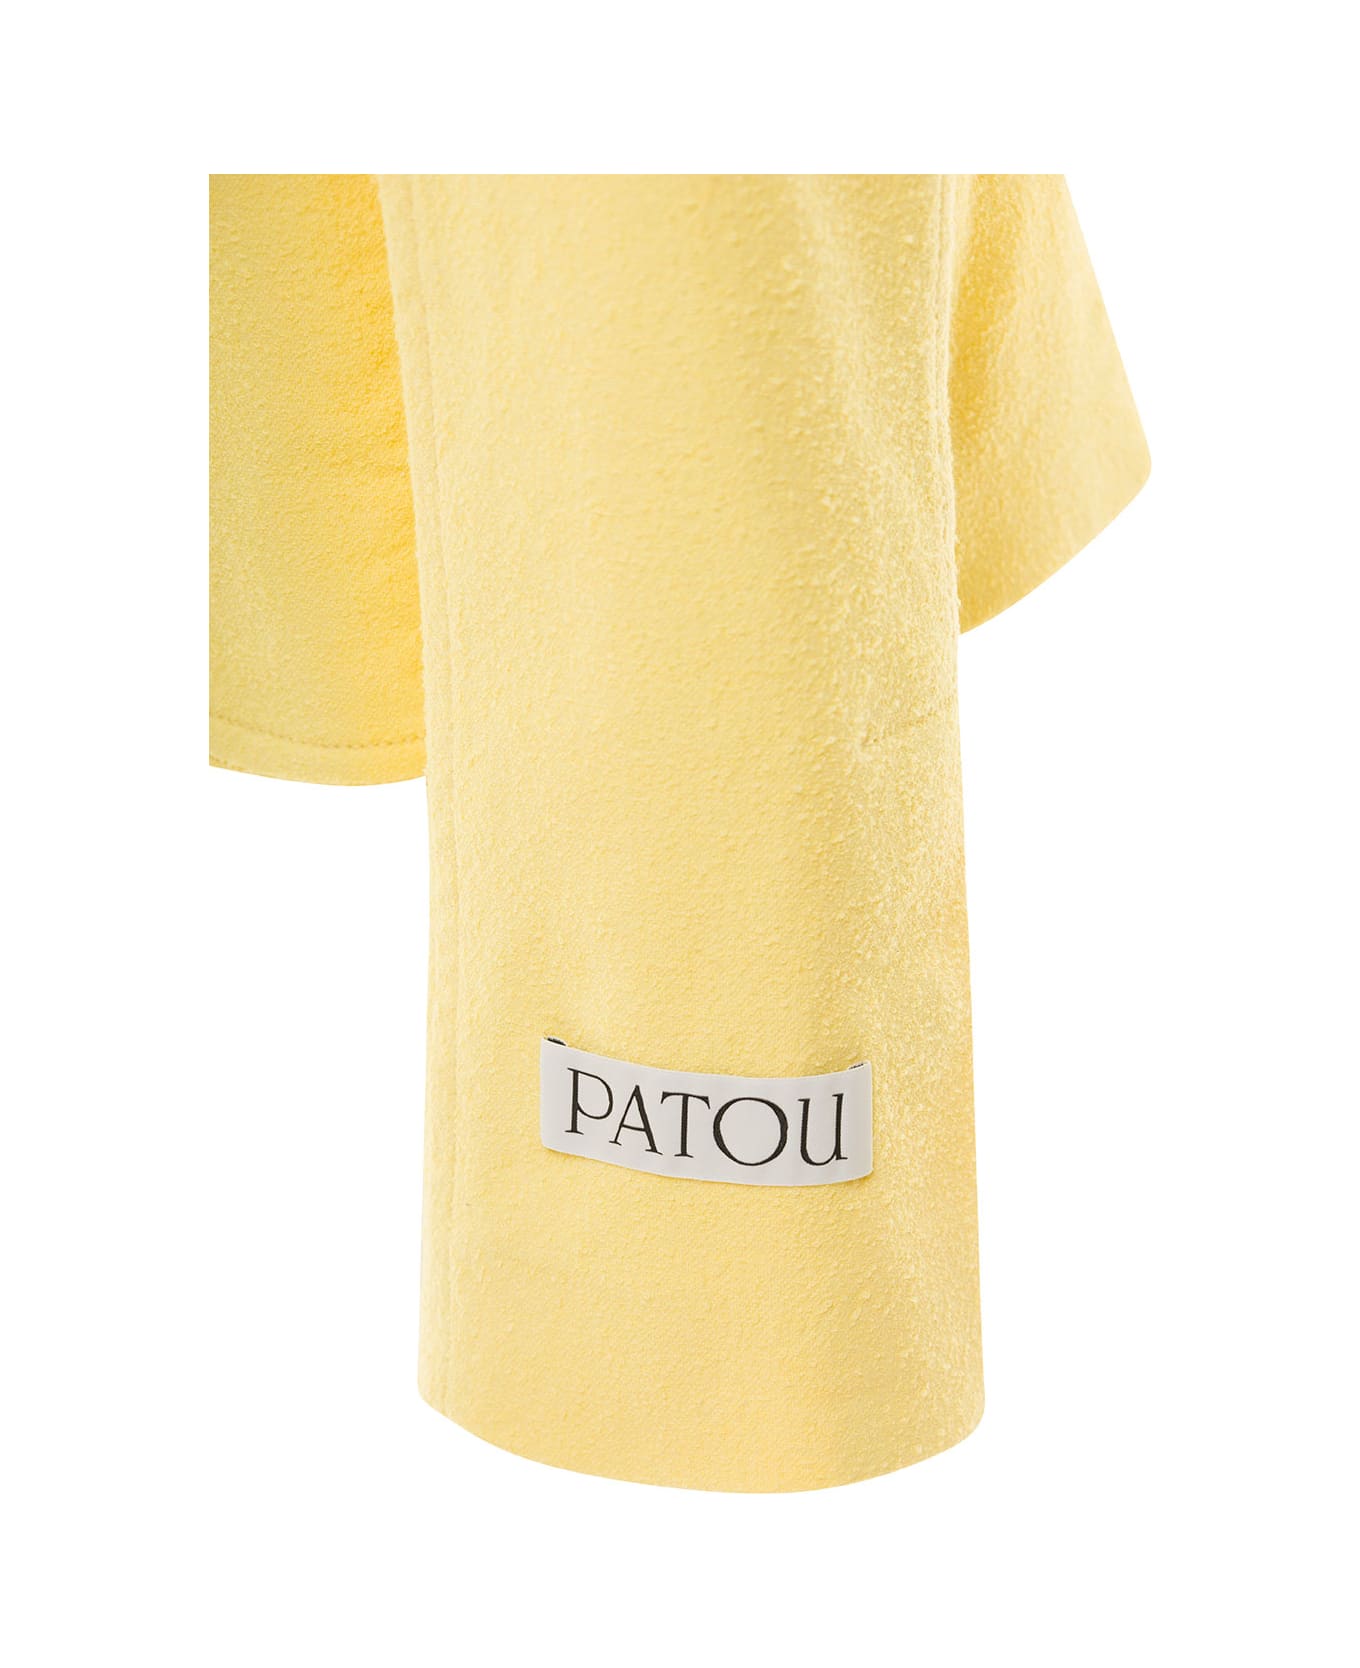 Patou Yellow Jacket With Branded Buttons In Cotton Blend Tweed Woman - Yellow